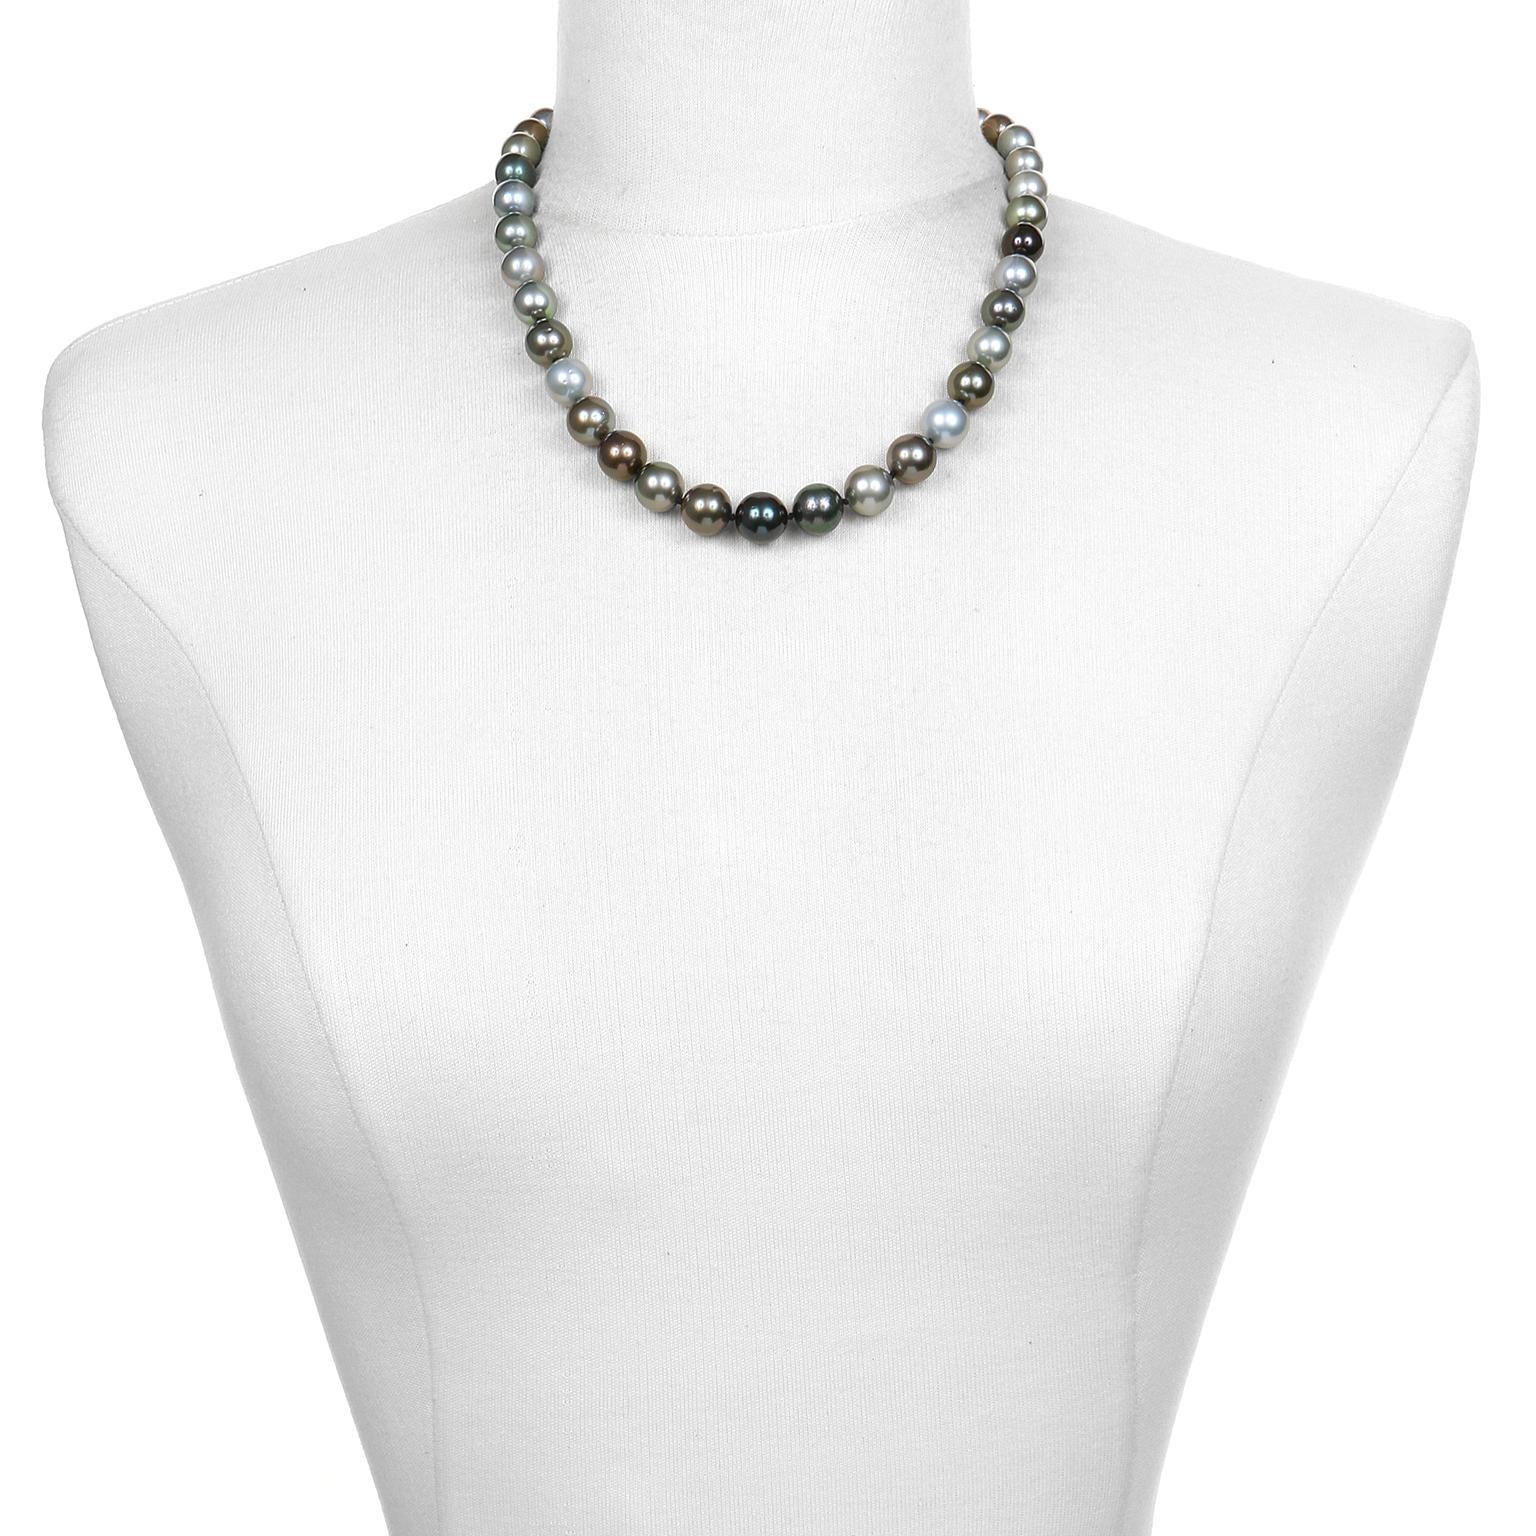 Black Tahitian Cultured Pearl Necklace.
Black Tahitian Baroque Cultured Pearl Necklace.
Classic, chic and finished with Faye Kim's signature 18k green gold handmade clasp.  
Slightly off-round in shape with its silver-grey, green, and bronze